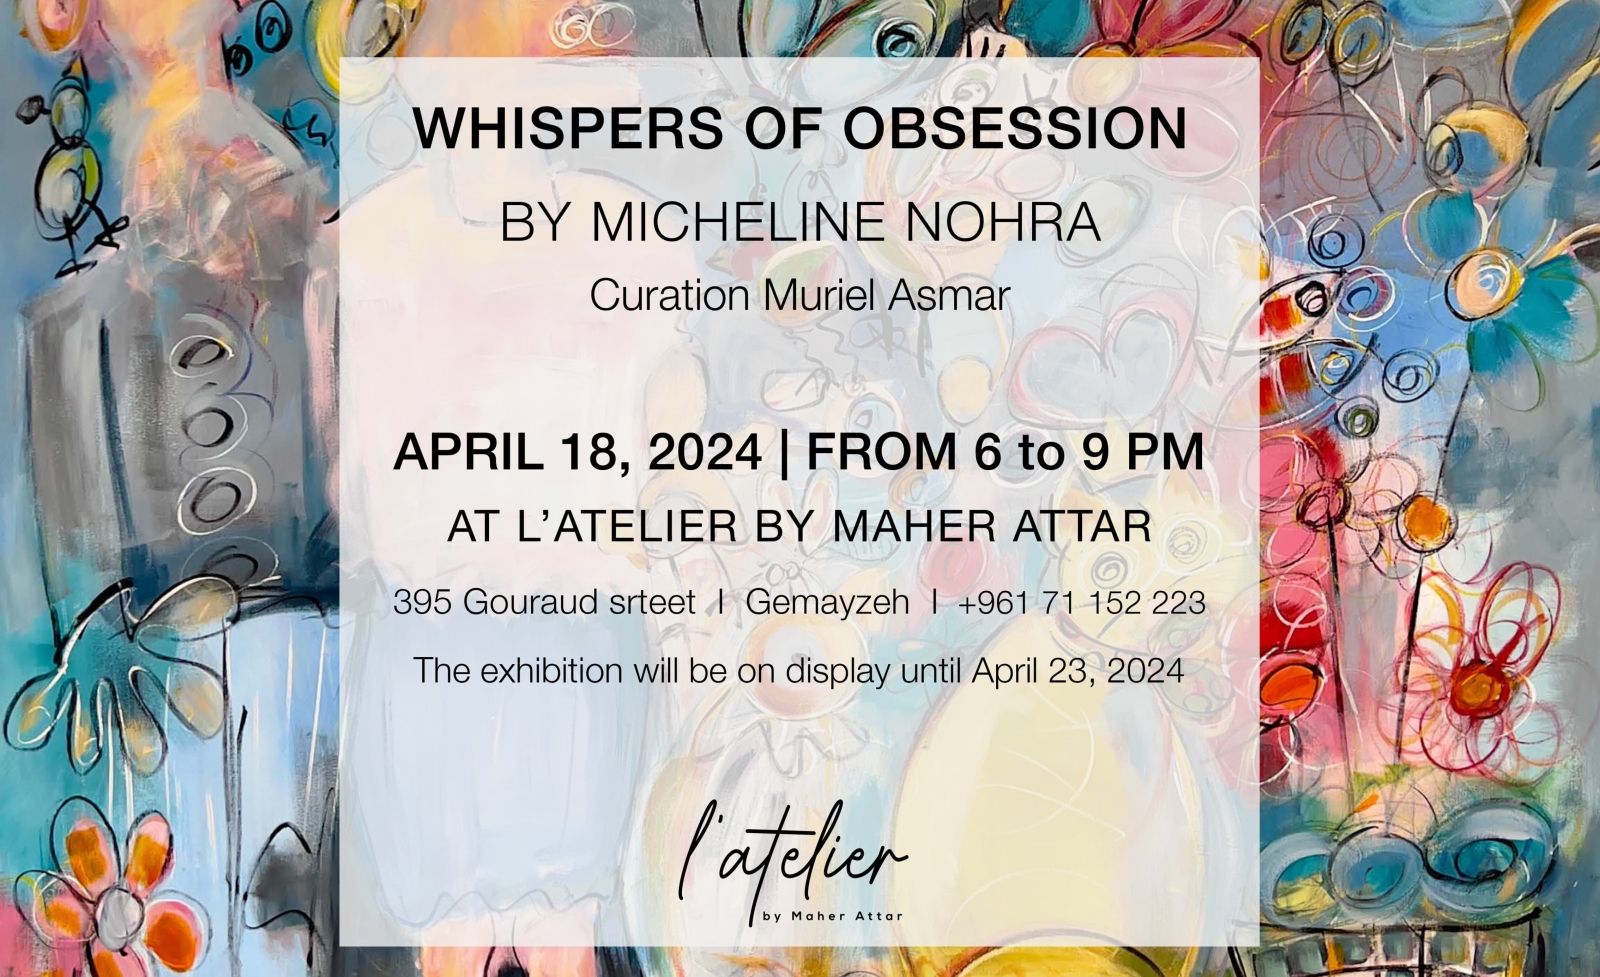 “WHISPERS OBSESSIONS” by Micheline Nohra